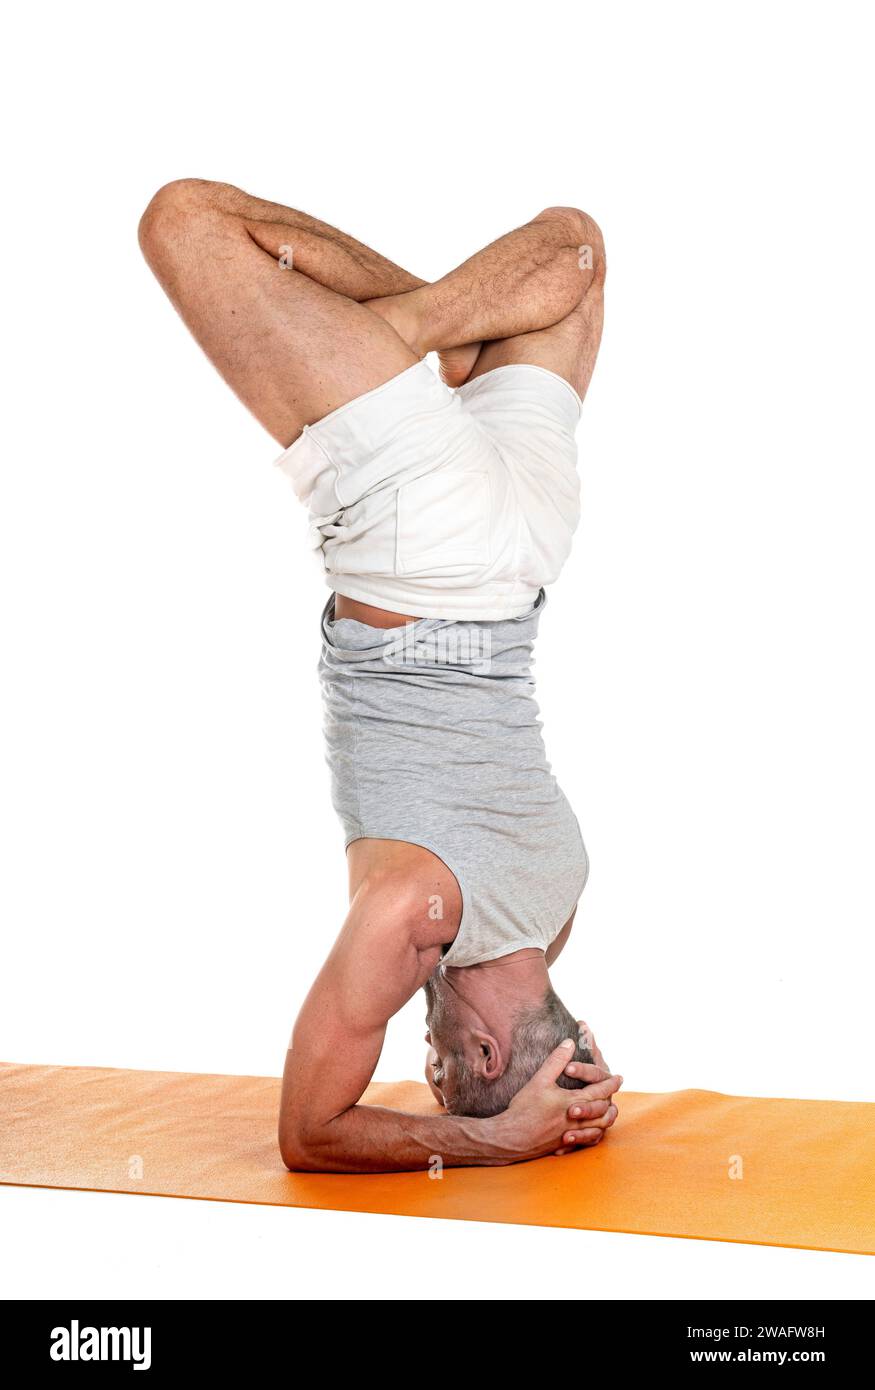 man and hatha yoga asana in front of white background Stock Photo